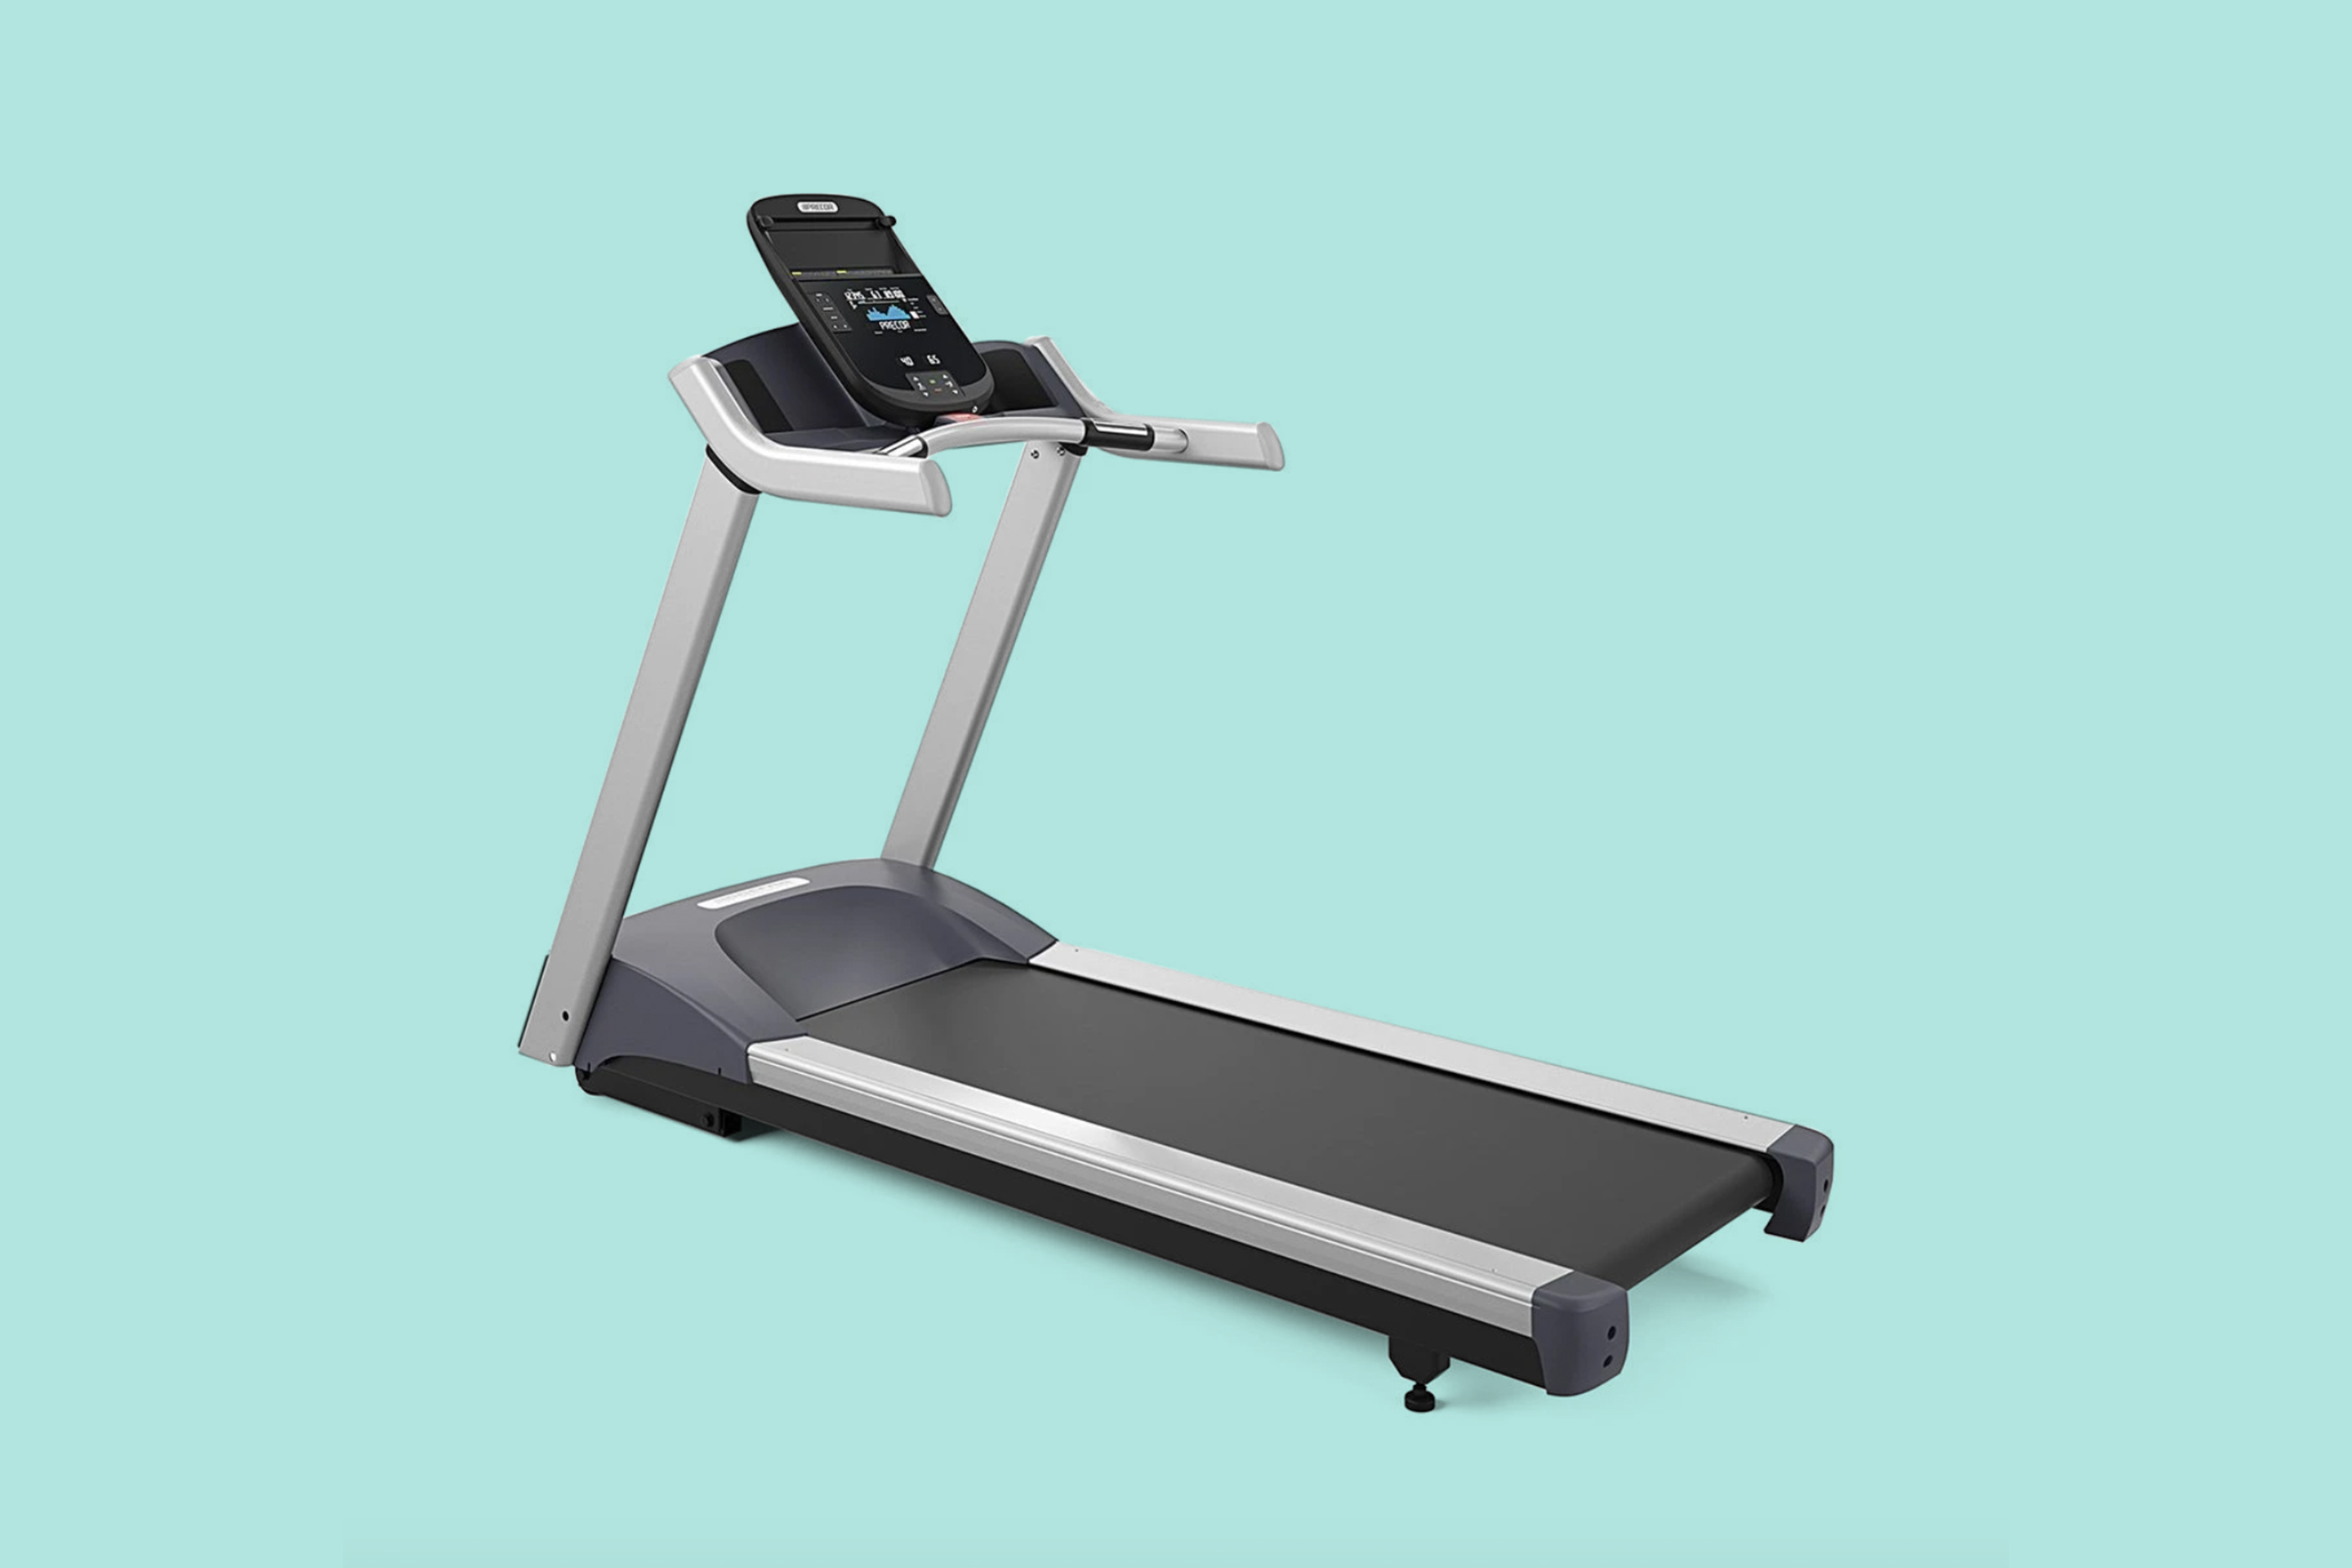 places that sell treadmills